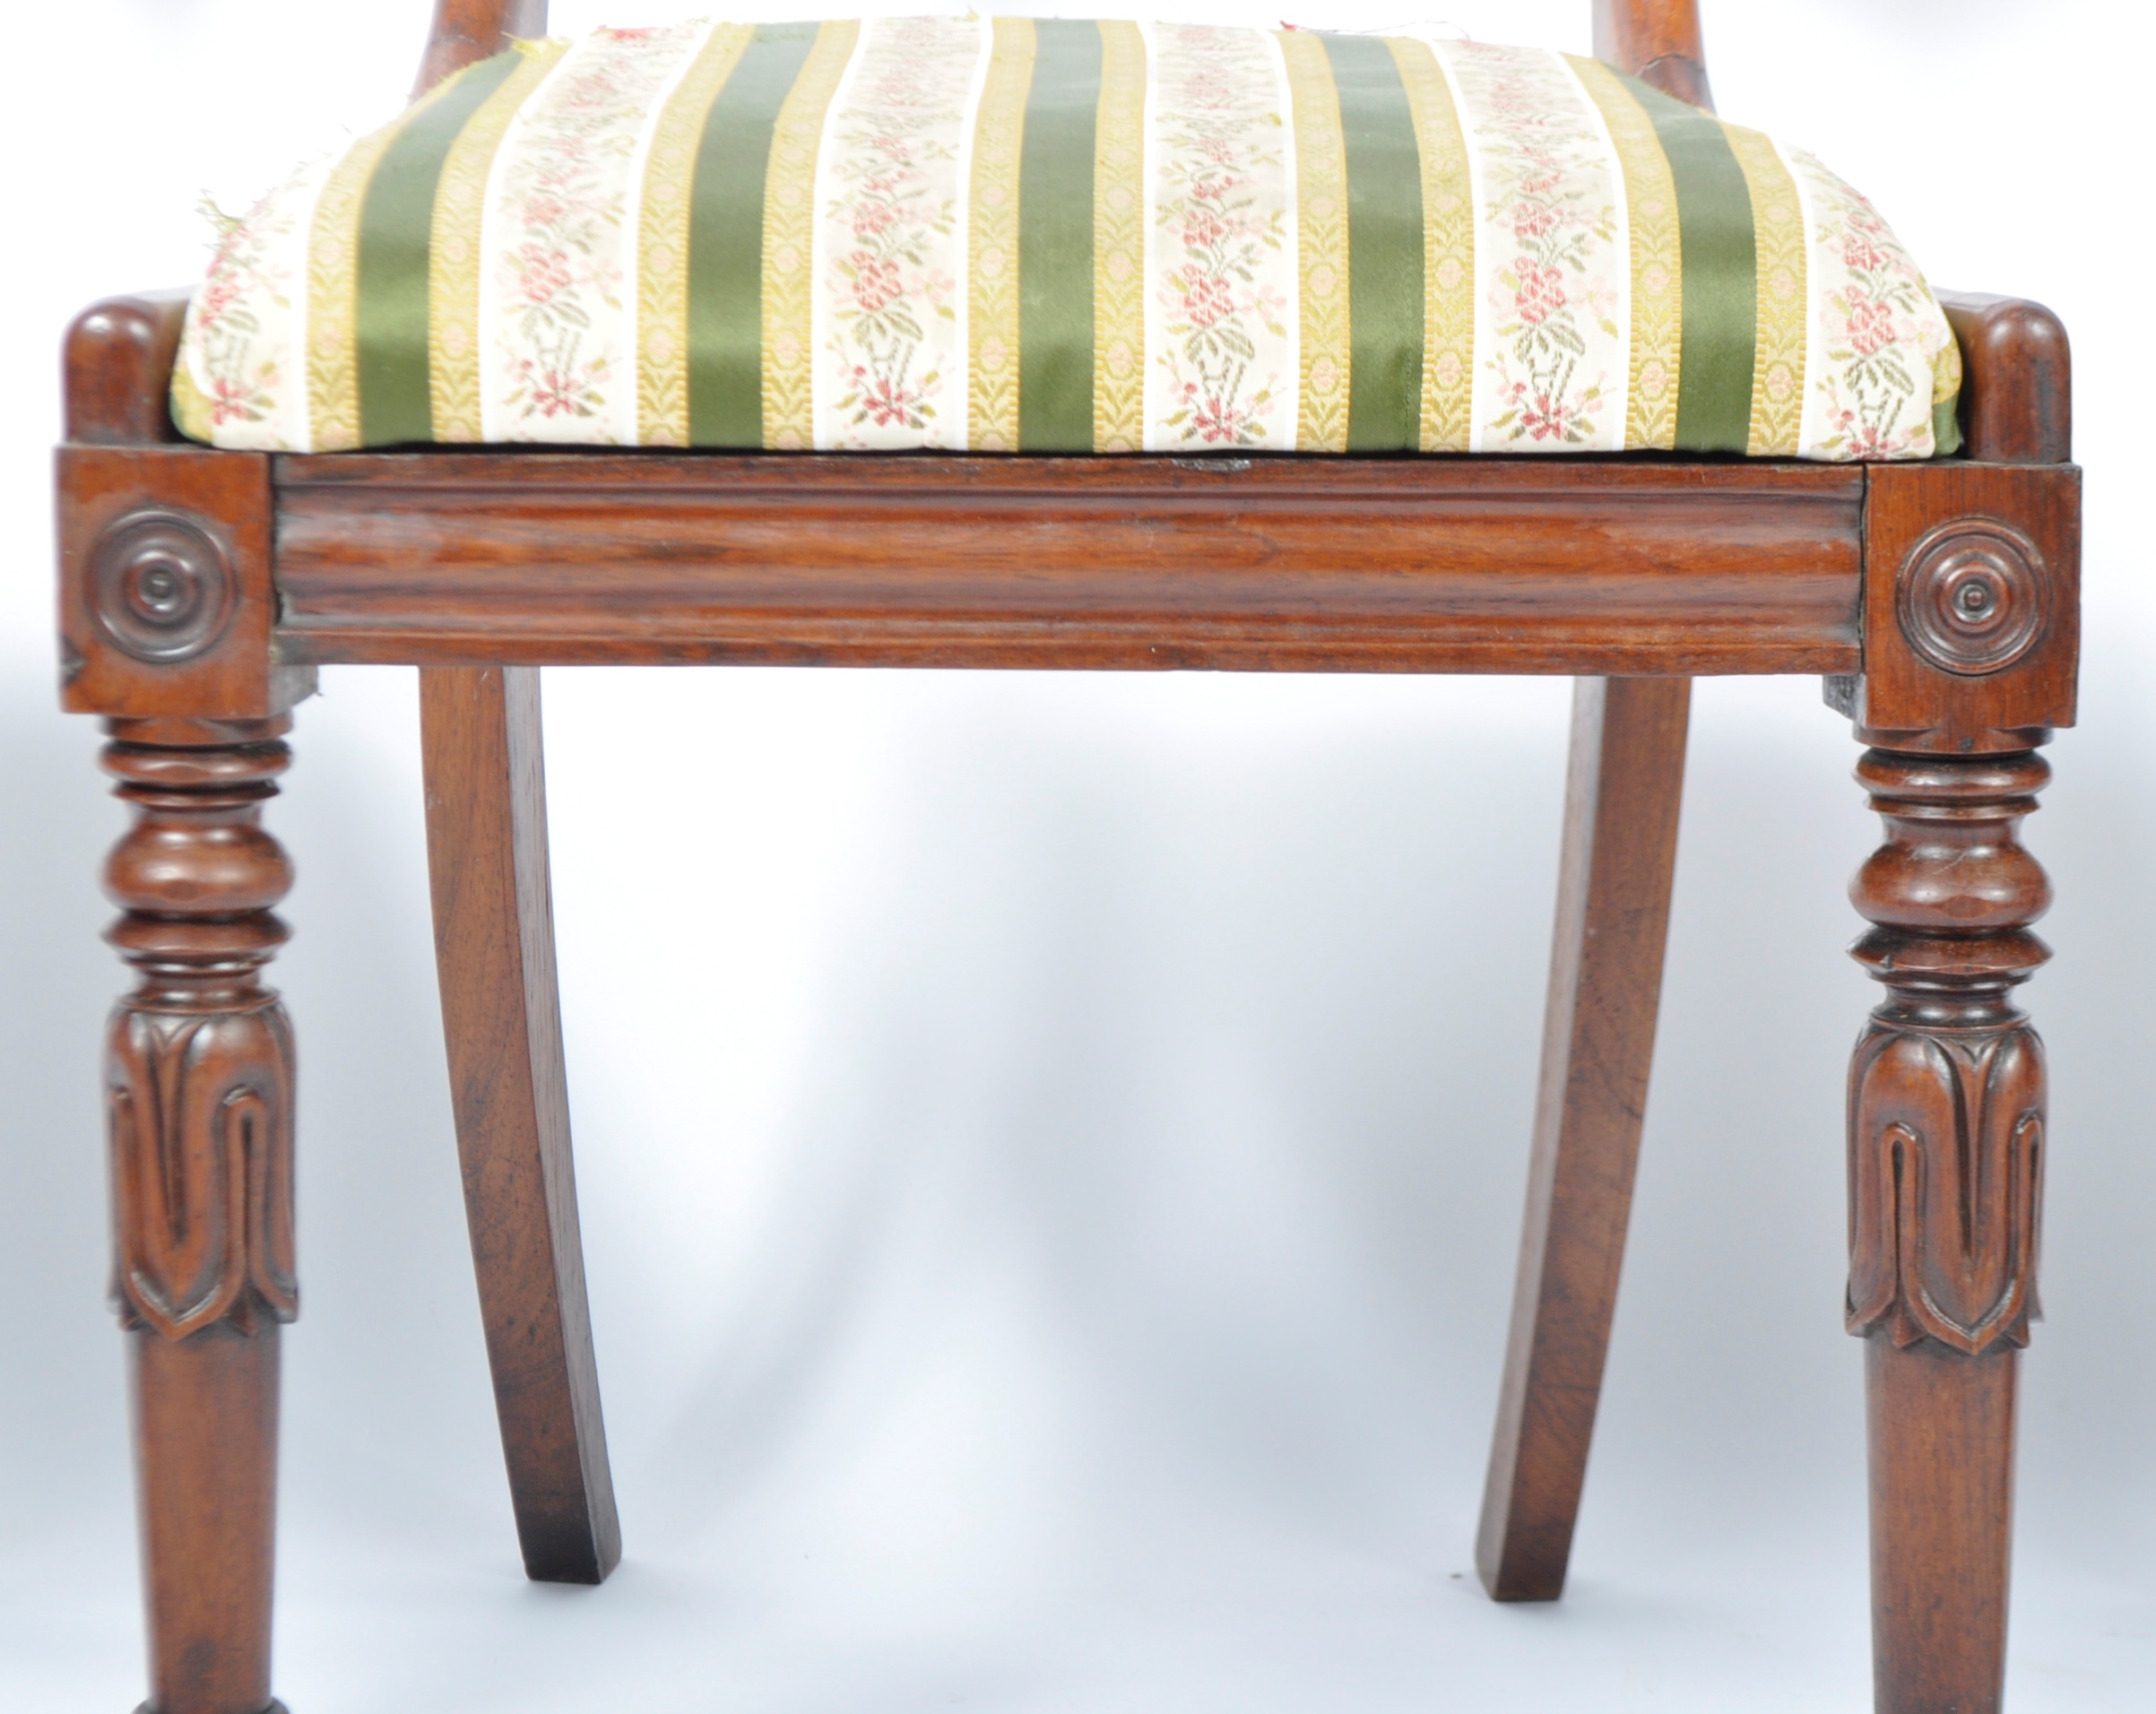 SET OF SIX ANTIQUE ROSEWOOD DINING CHAIRS IN THE GILLOWS STYLE - Image 9 of 12